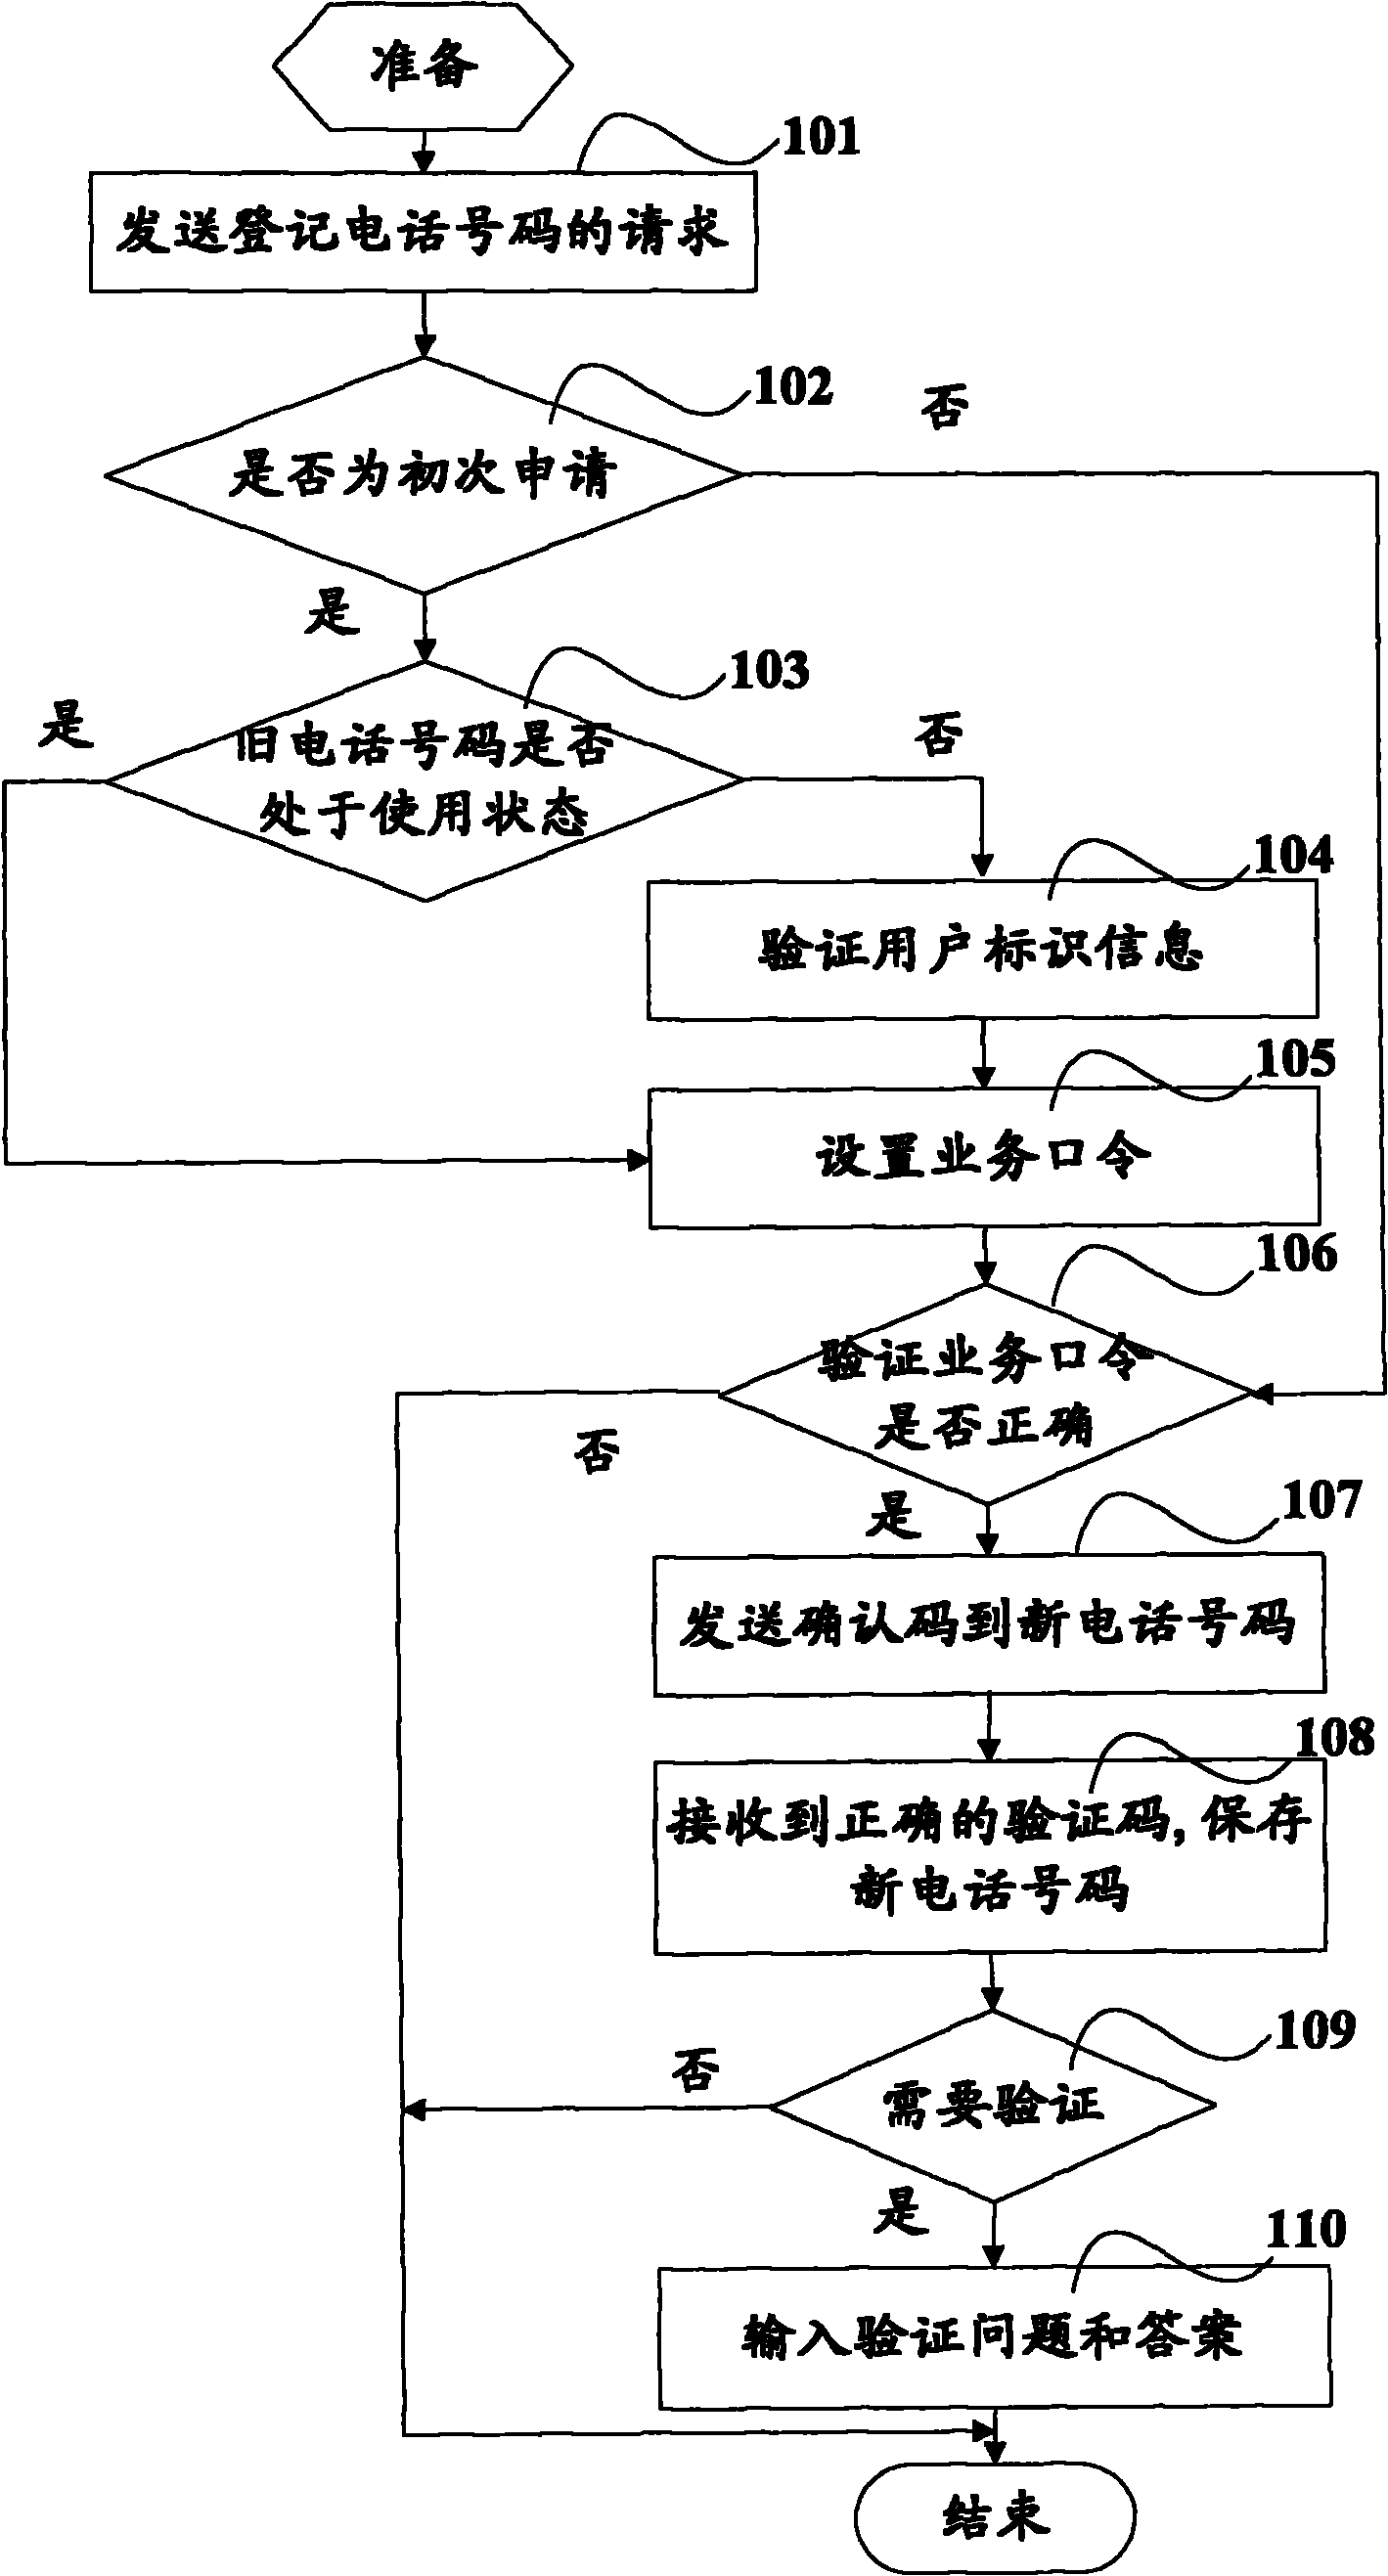 Method and system for registering and querying changed telephone number